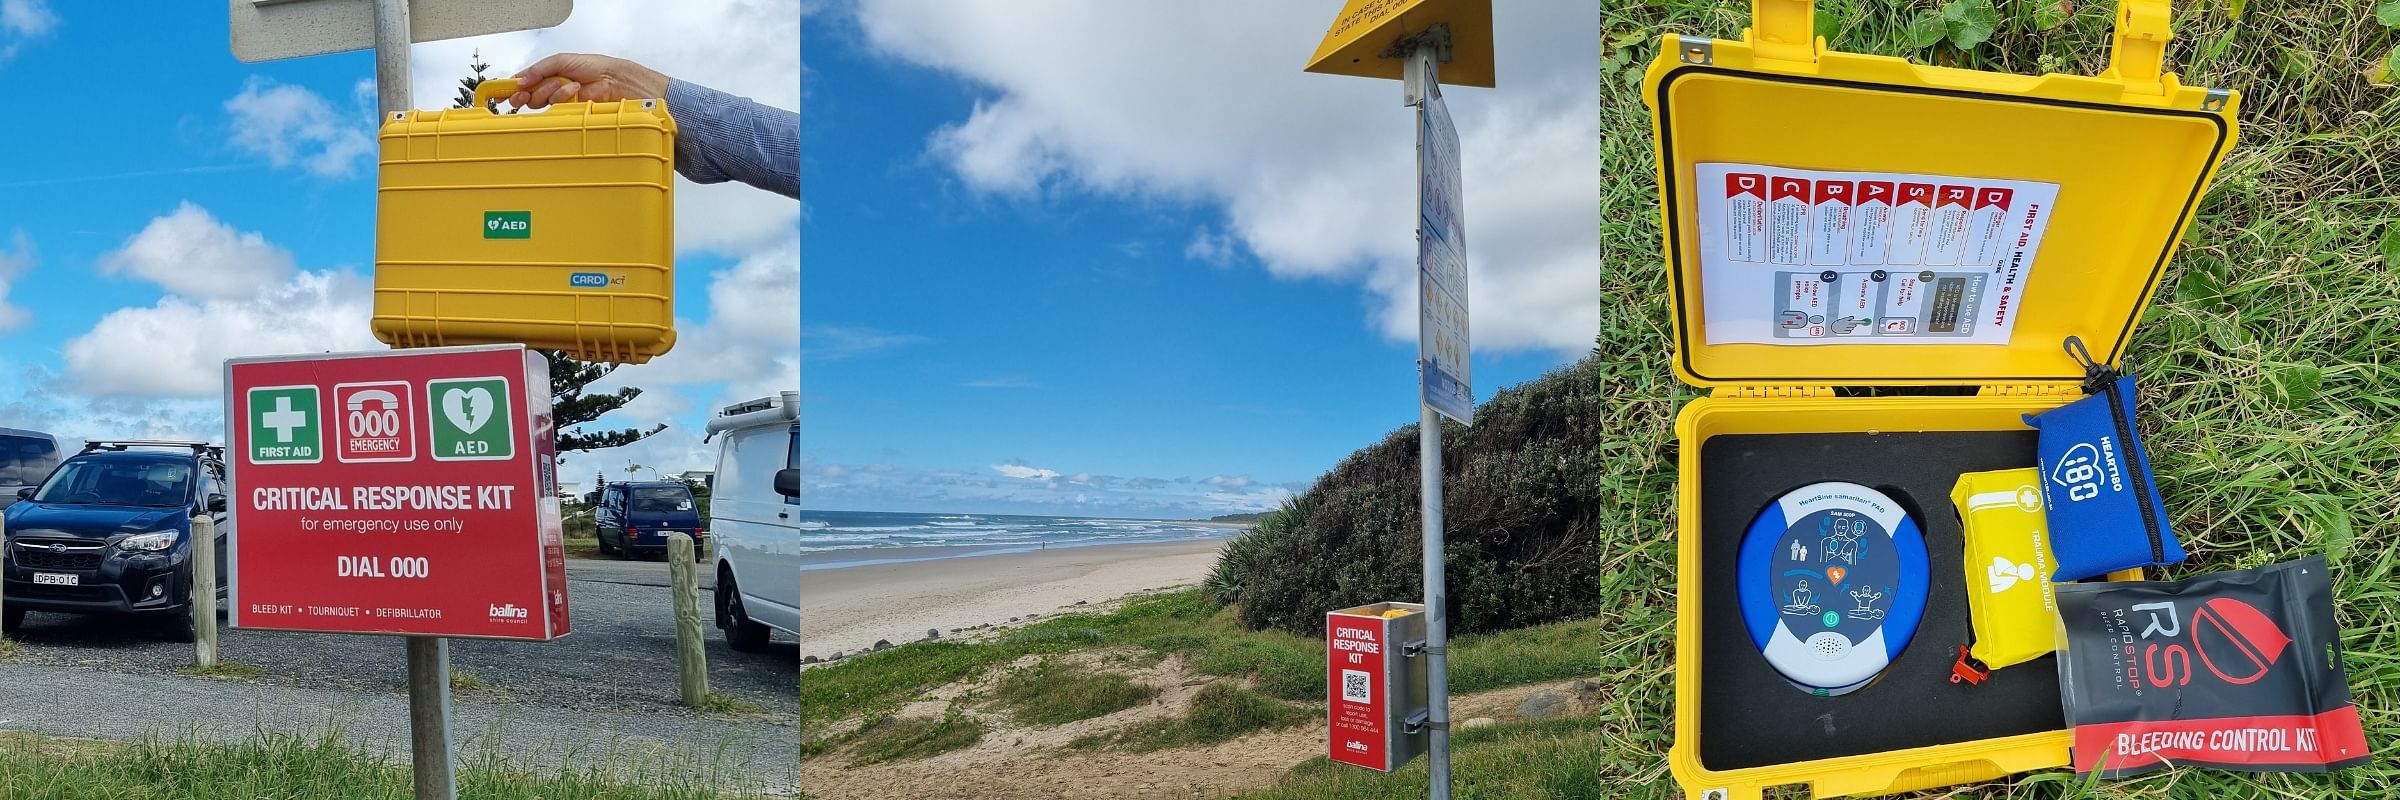 critical response kit installed on pole at sharpes beach